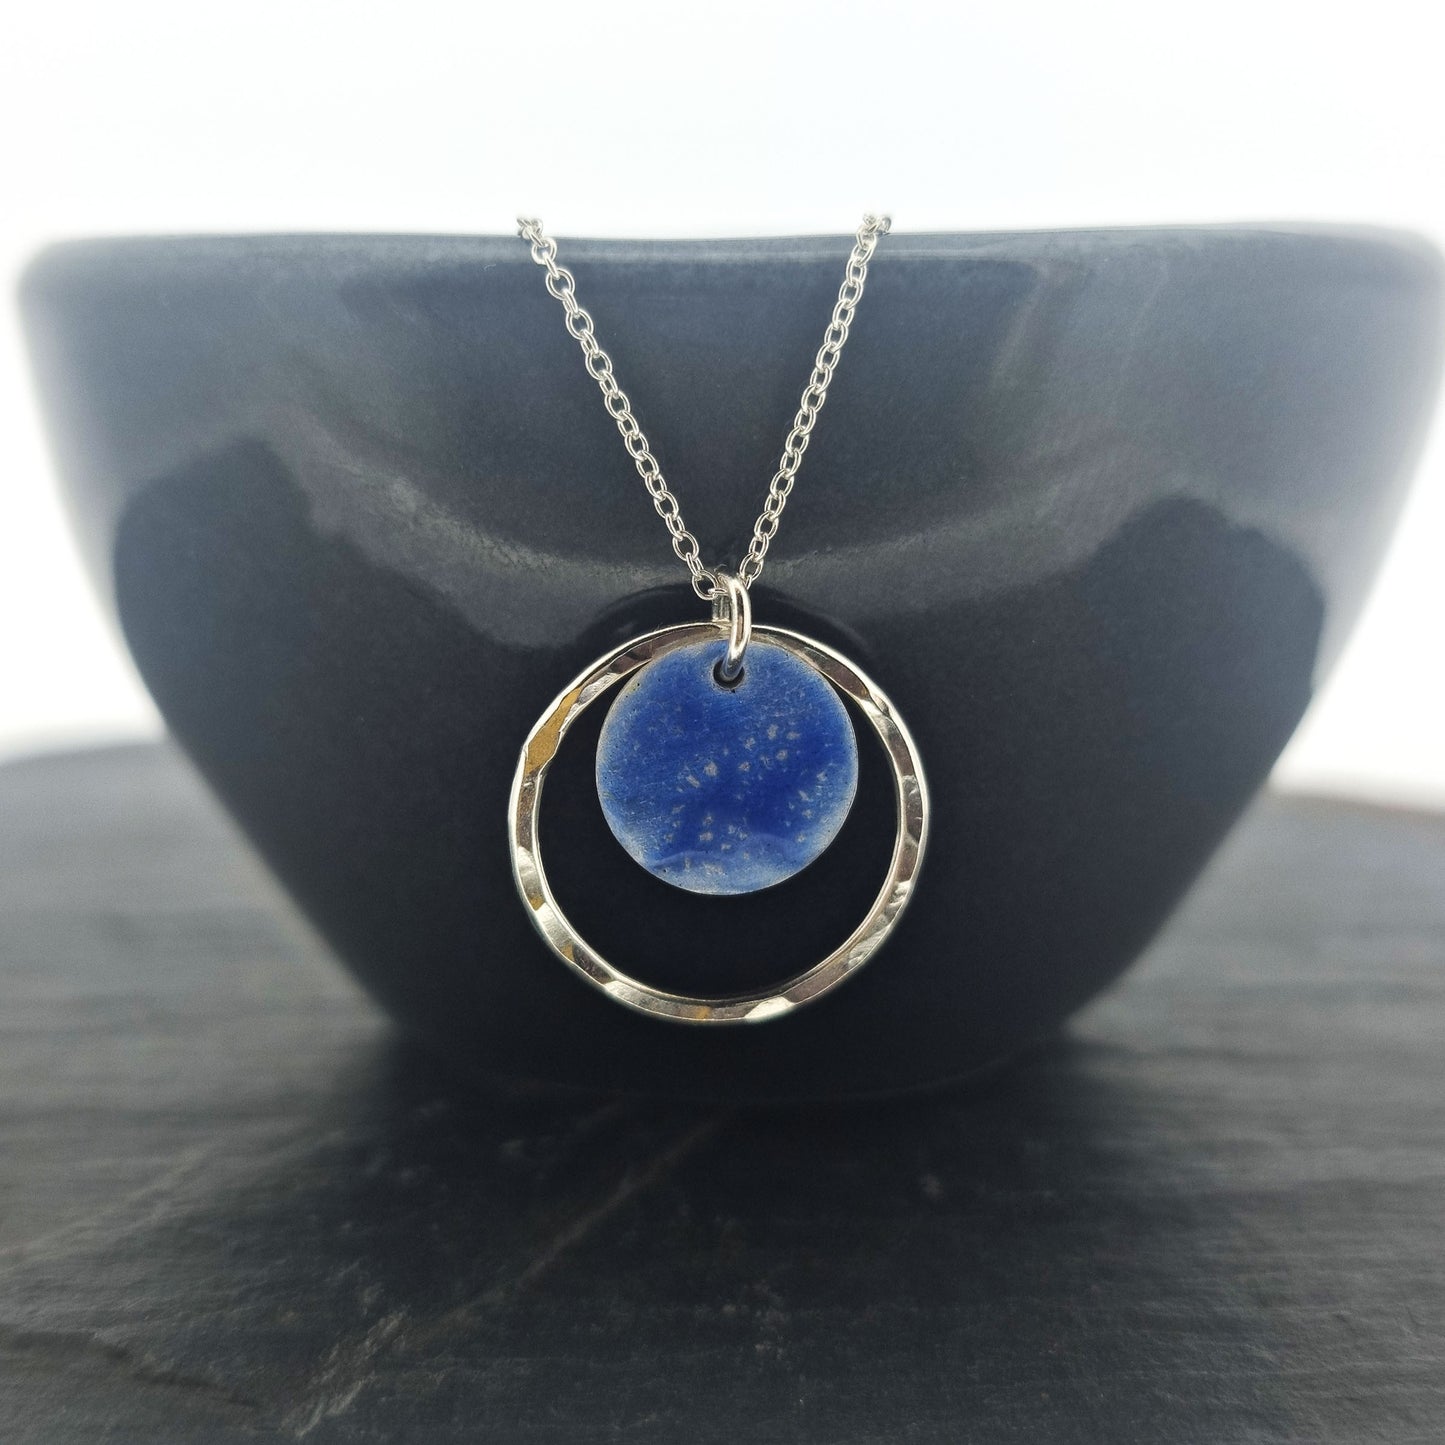 A silver pendant with a central disc with a blue patterned enamel surrounded by a silver hammered open circle. On a silver chain. Pictured on a black bowl.